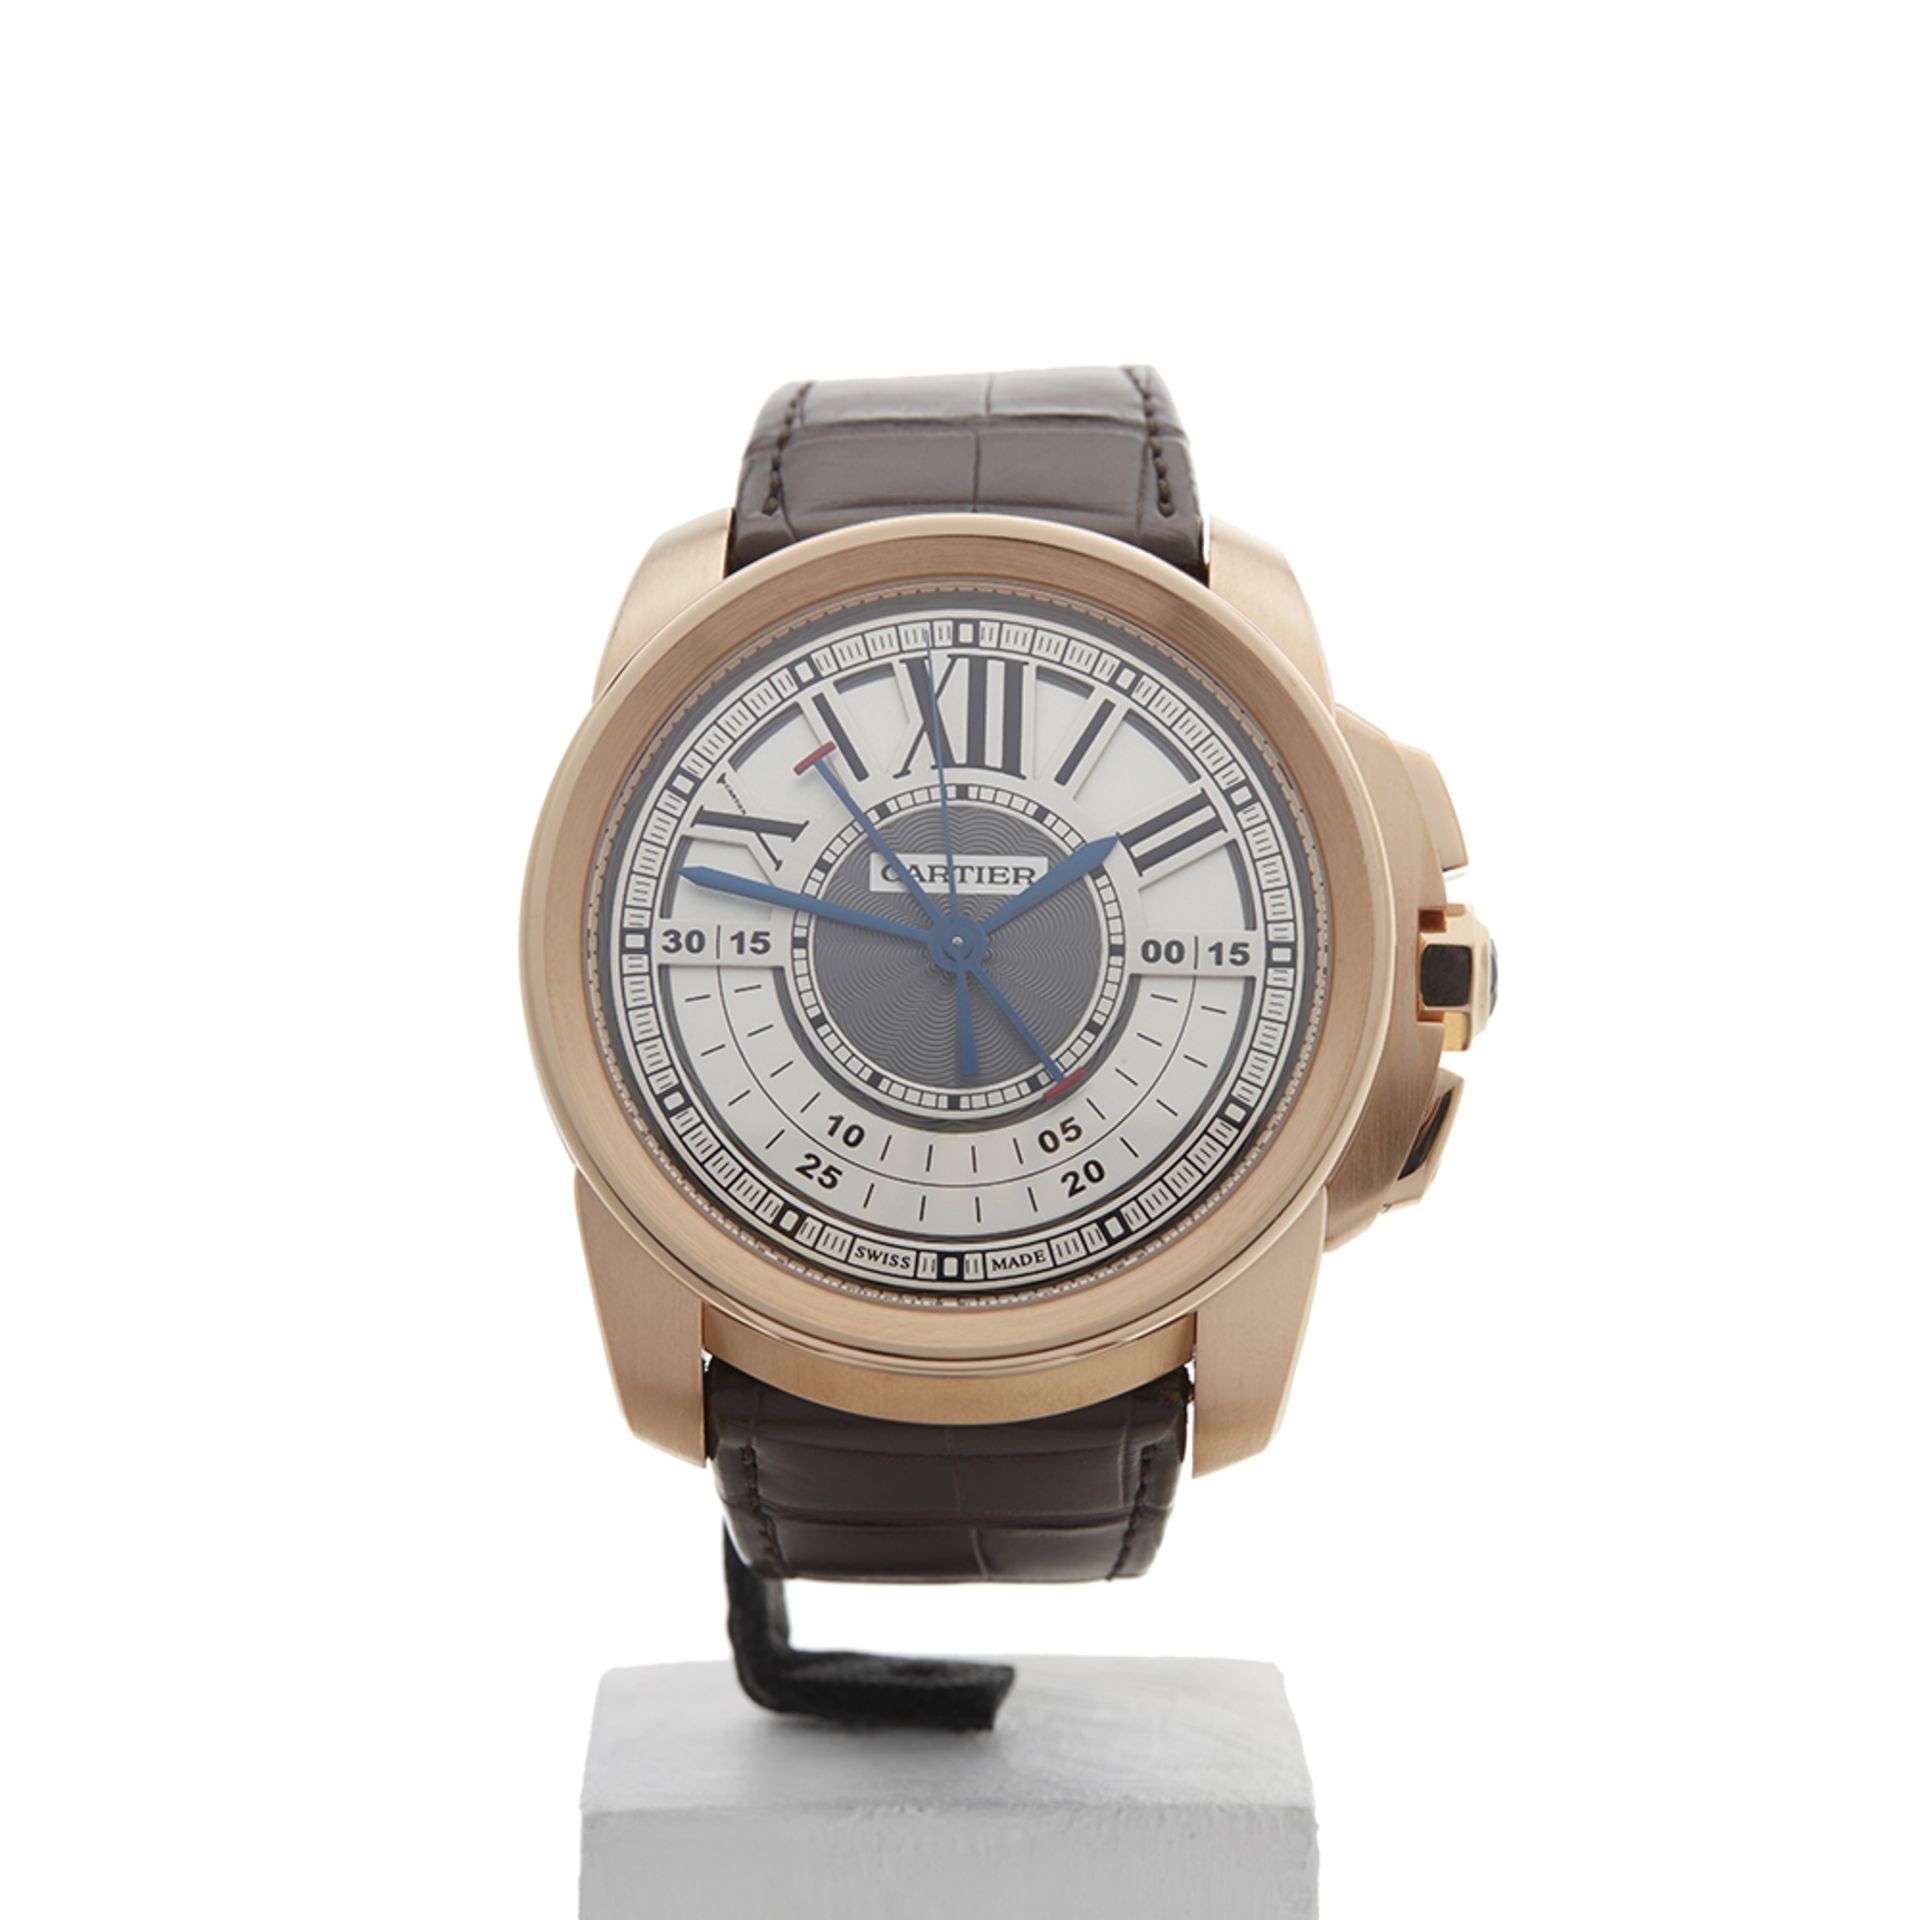 Cartier Calibre Central Chronograph 44mm 18K Rose Gold - 3242 or W7100004 - Image 2 of 9